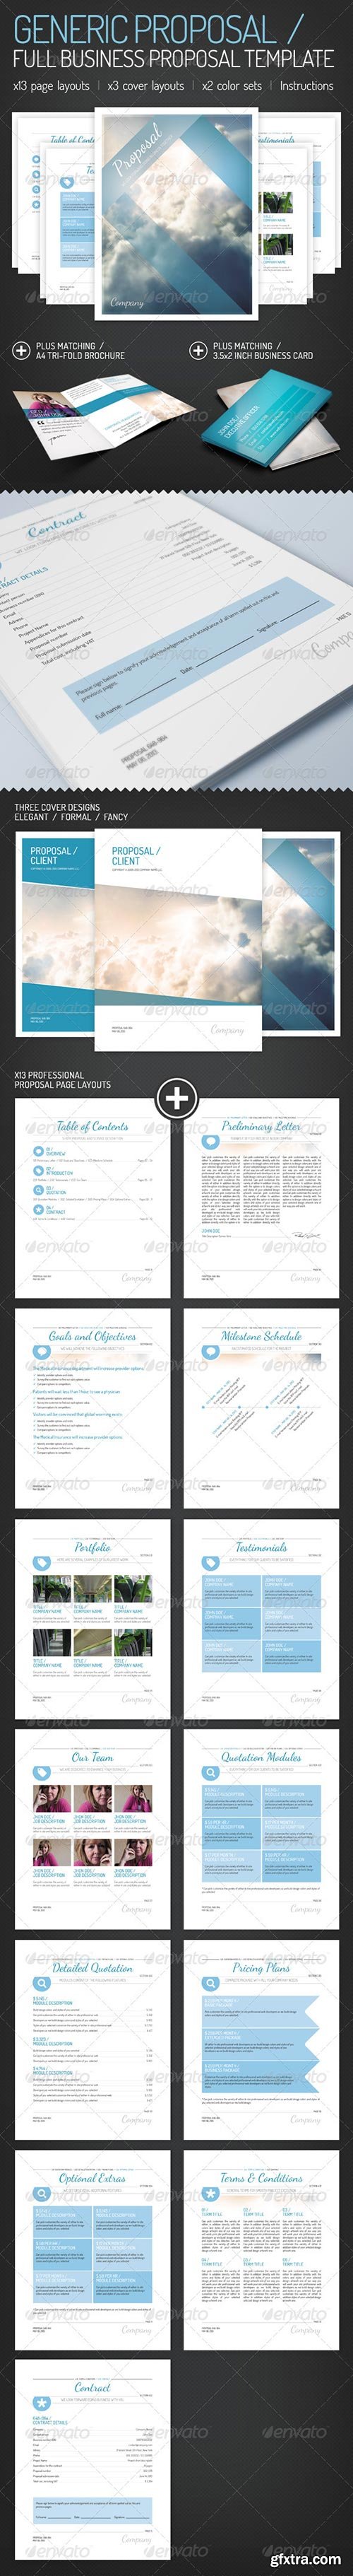 GraphicRiver - Generic Proposal - Full Business Proposal Template